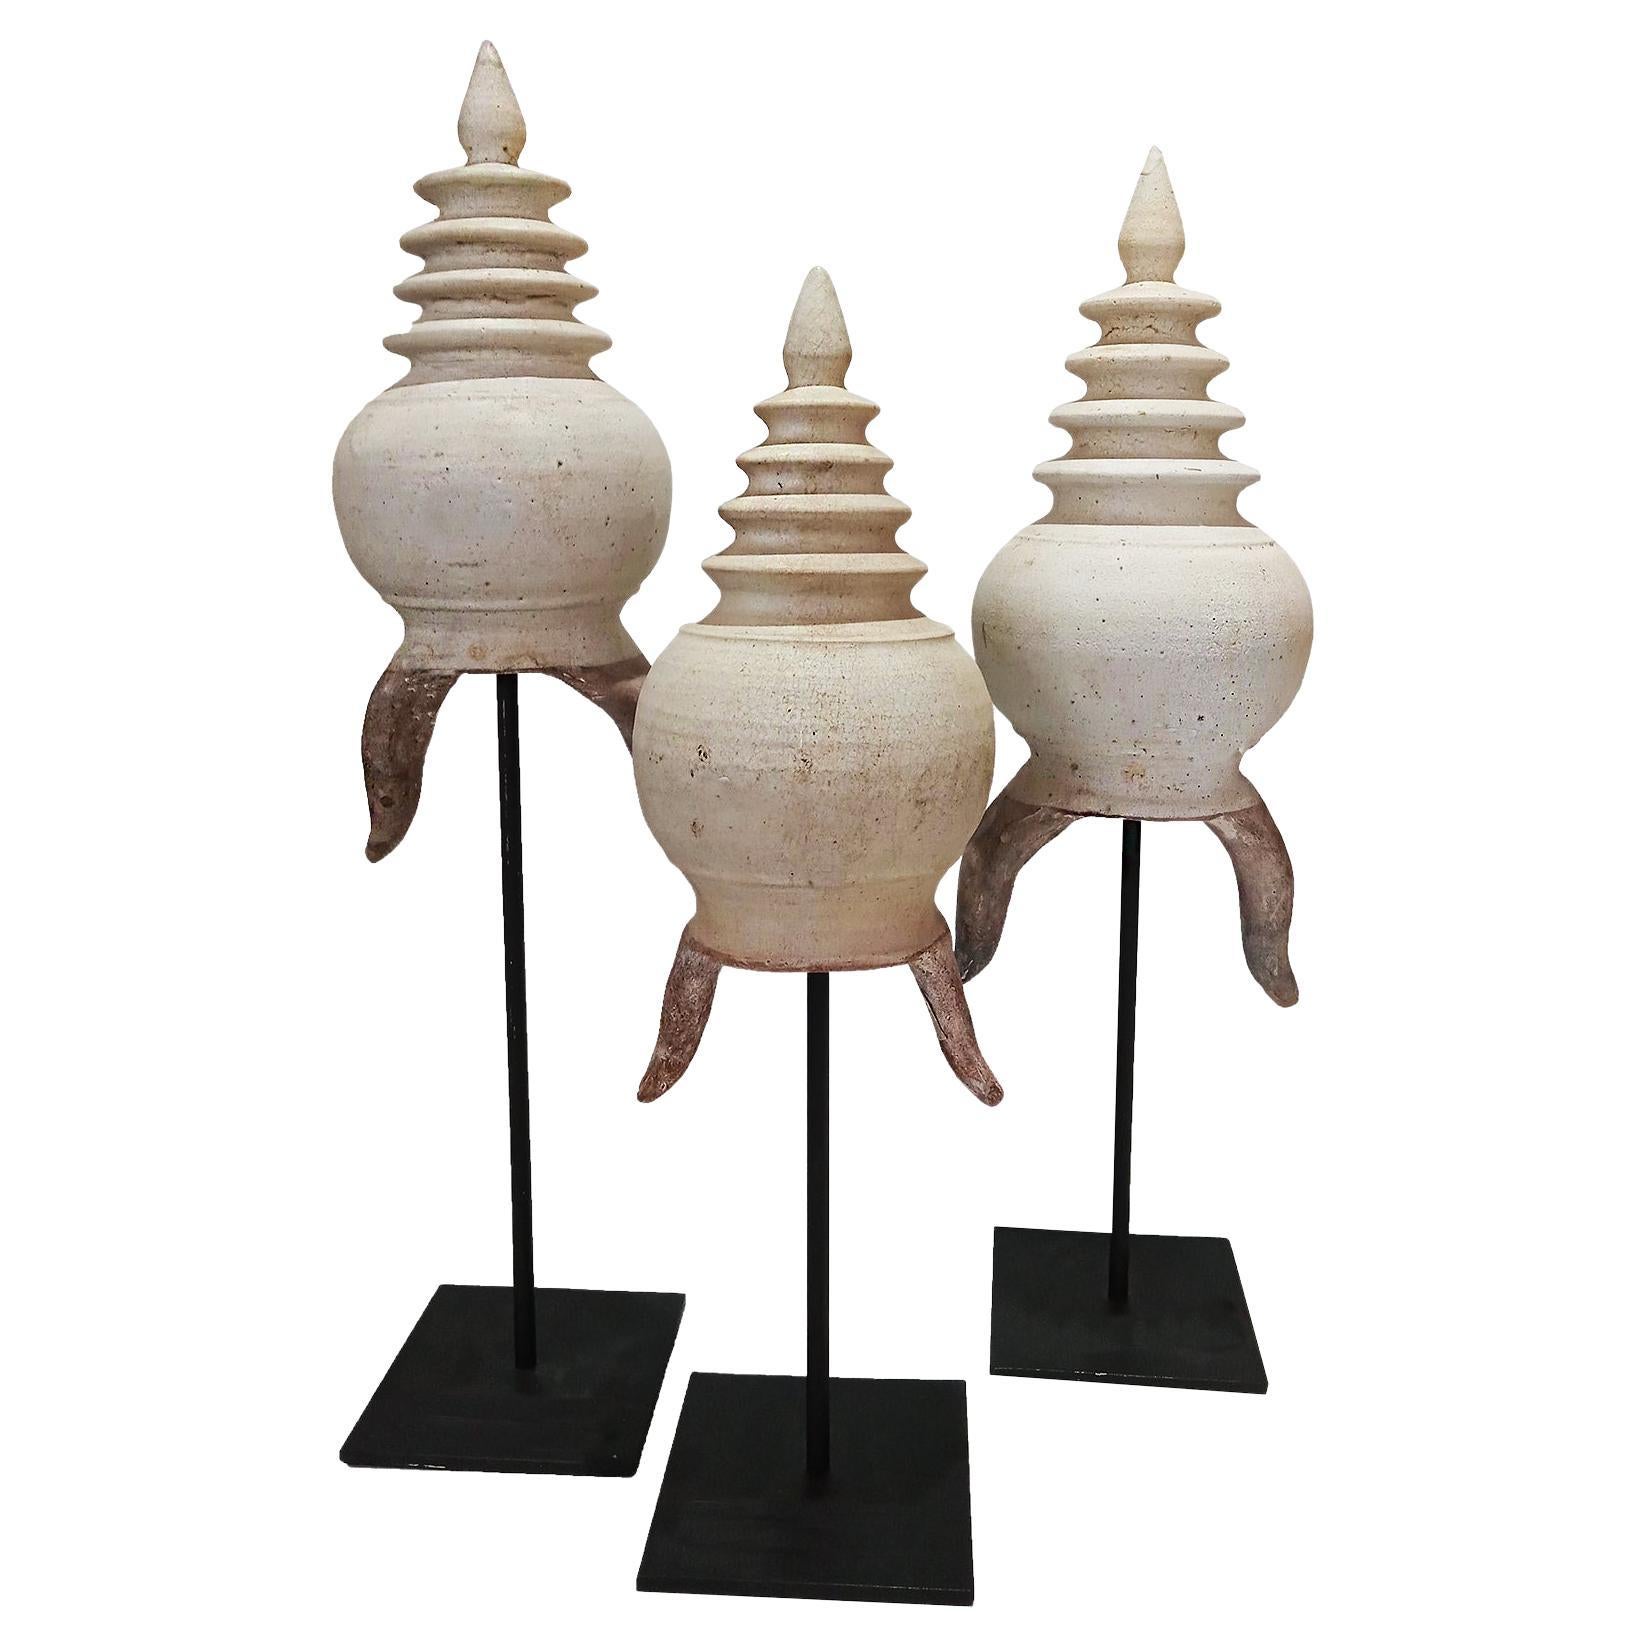 Thai Ceramic Stupa, on Stand For Sale